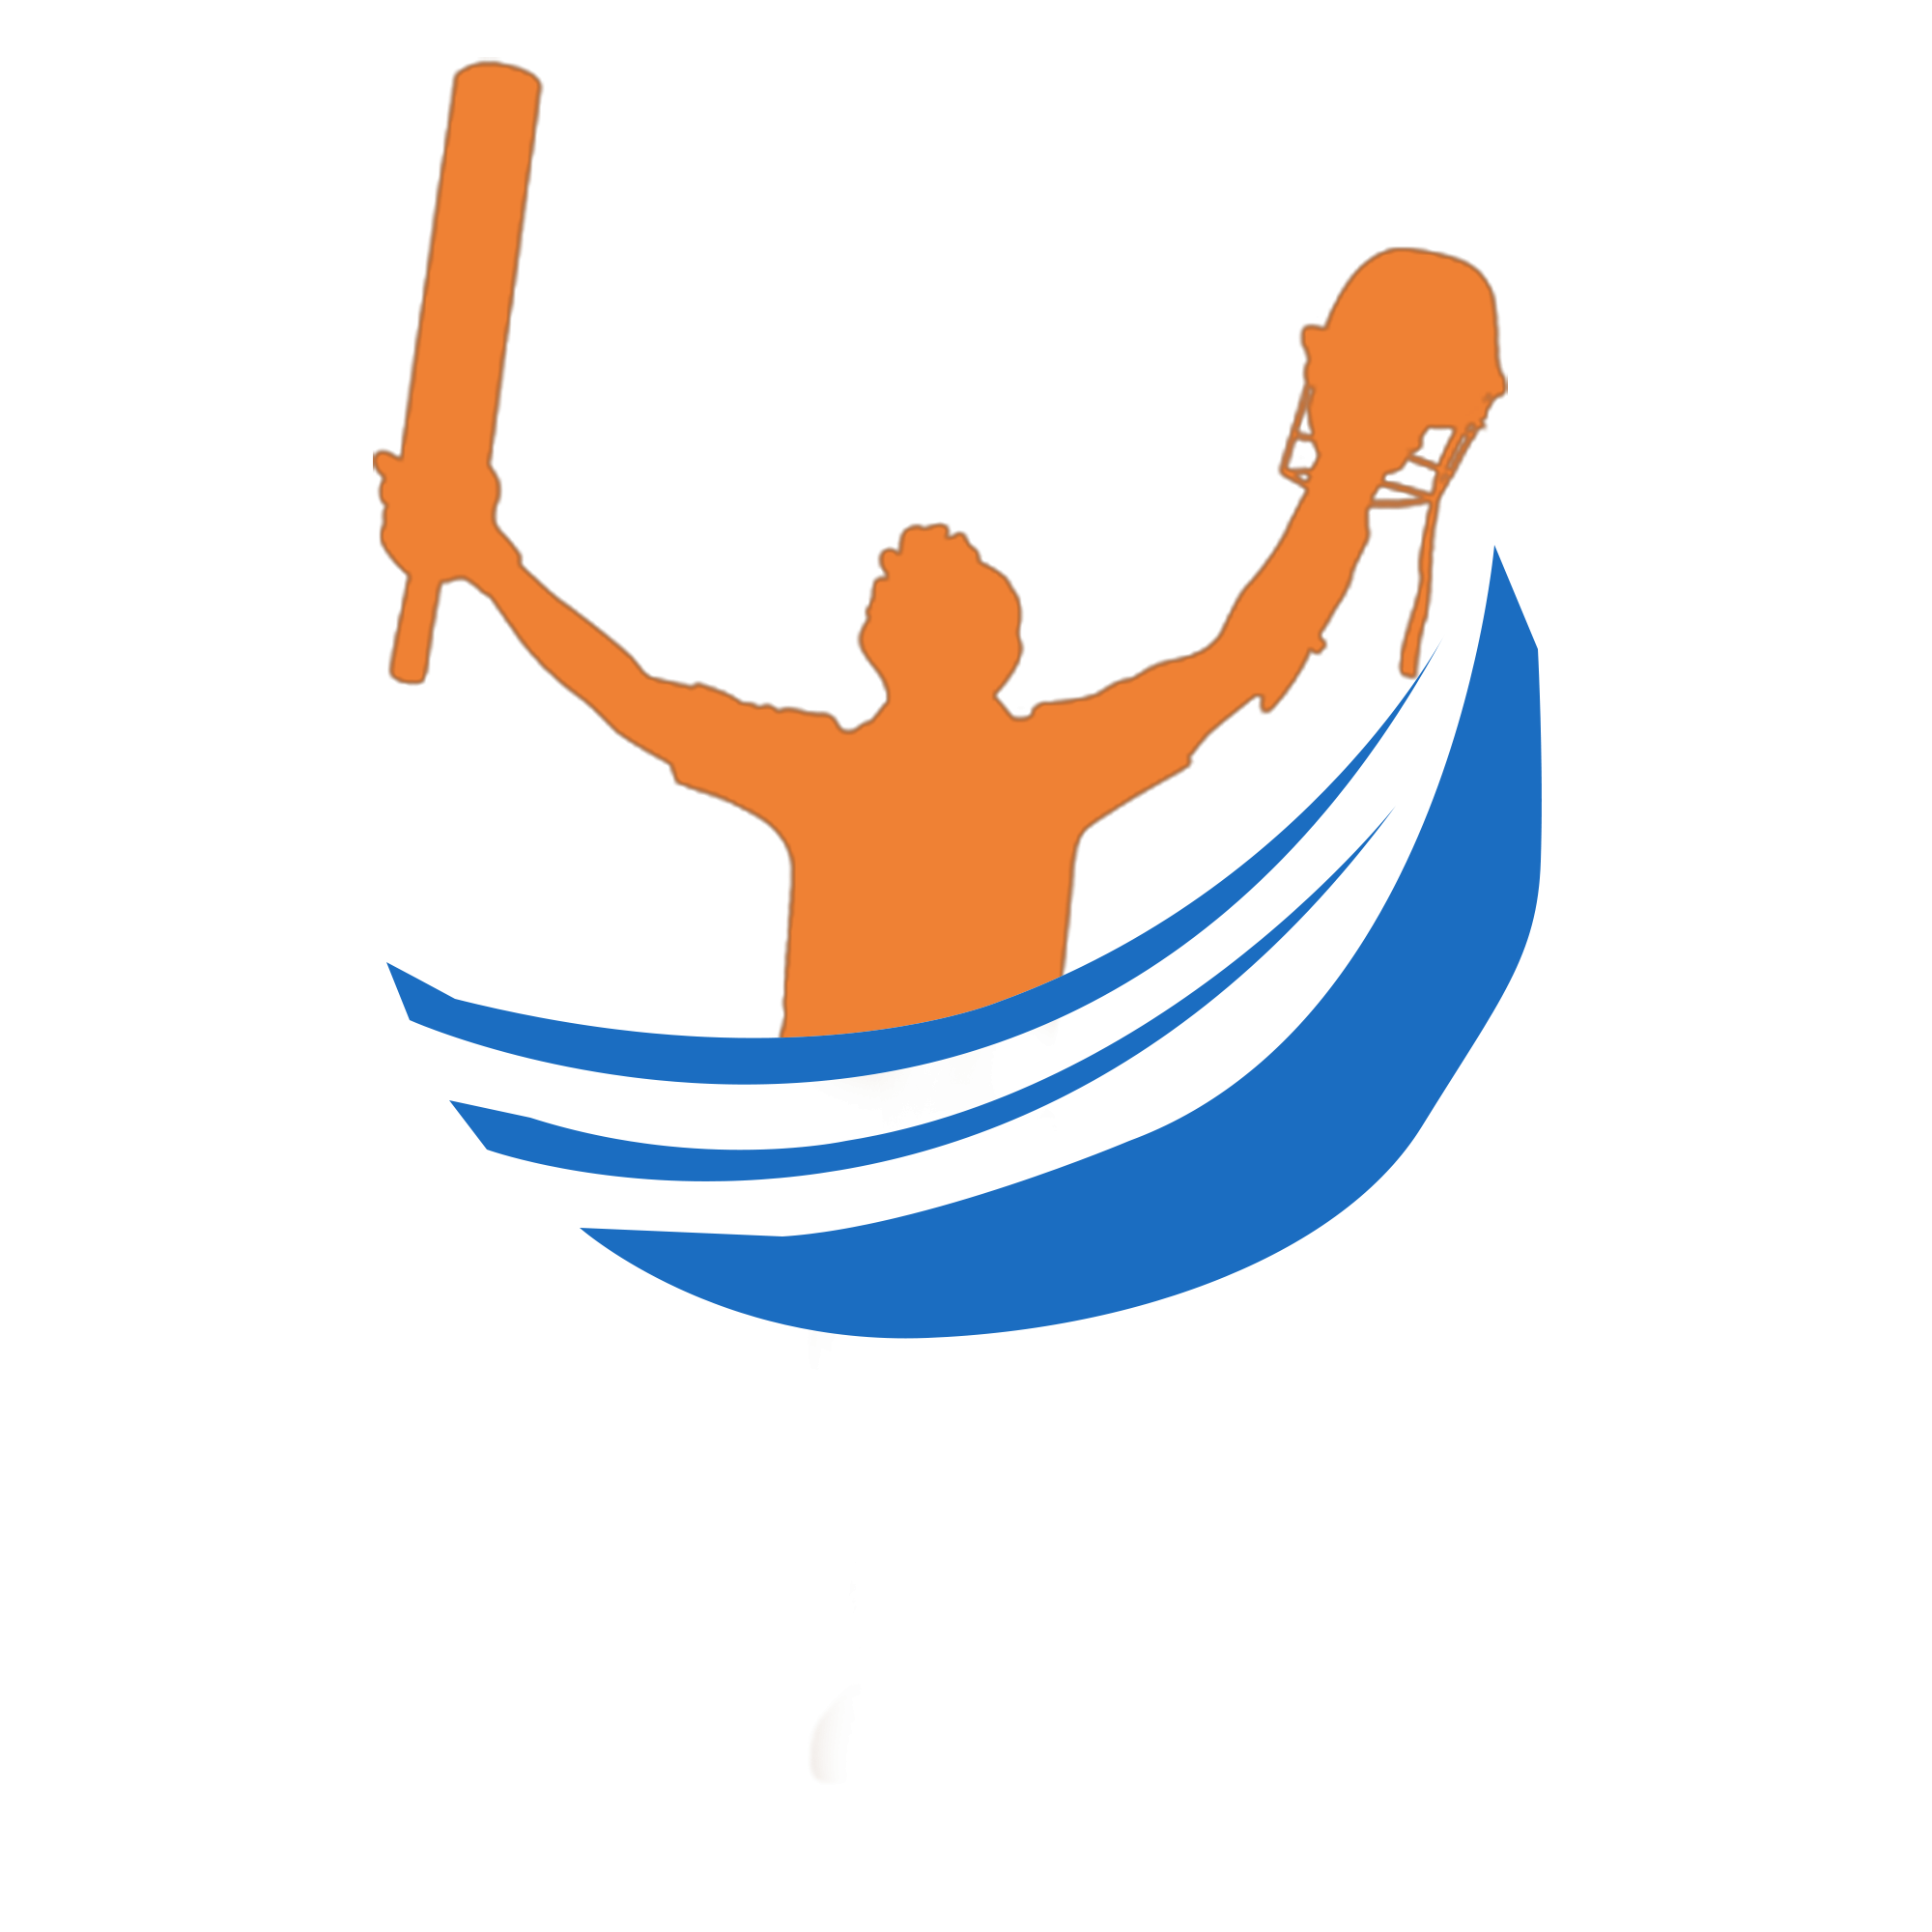 The logo of GPCL team Indian Sapphires